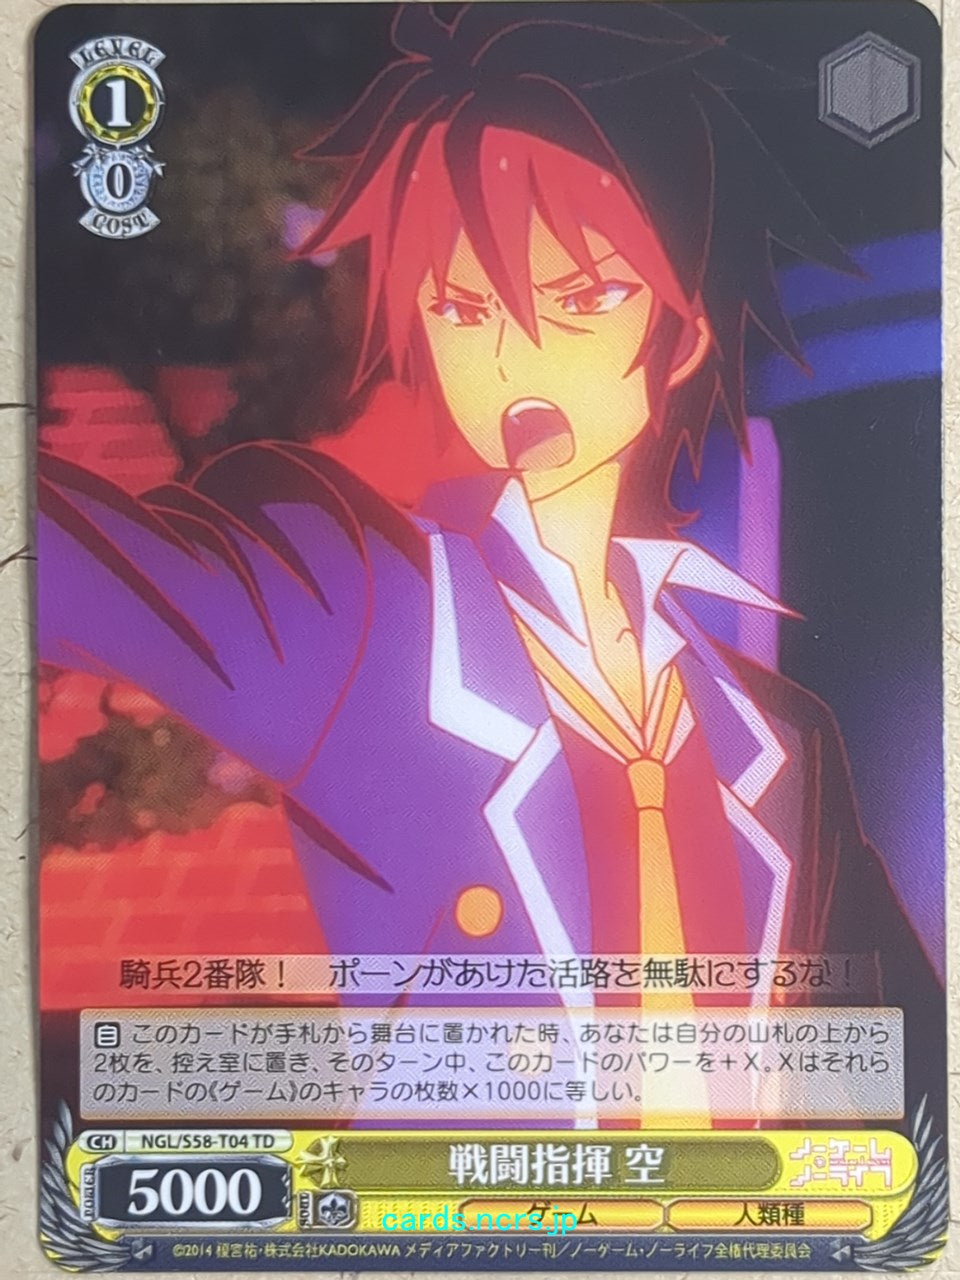 Weiss Schwarz No Game, No Life -Sora-   Trading Card NGL/S58-T04TD